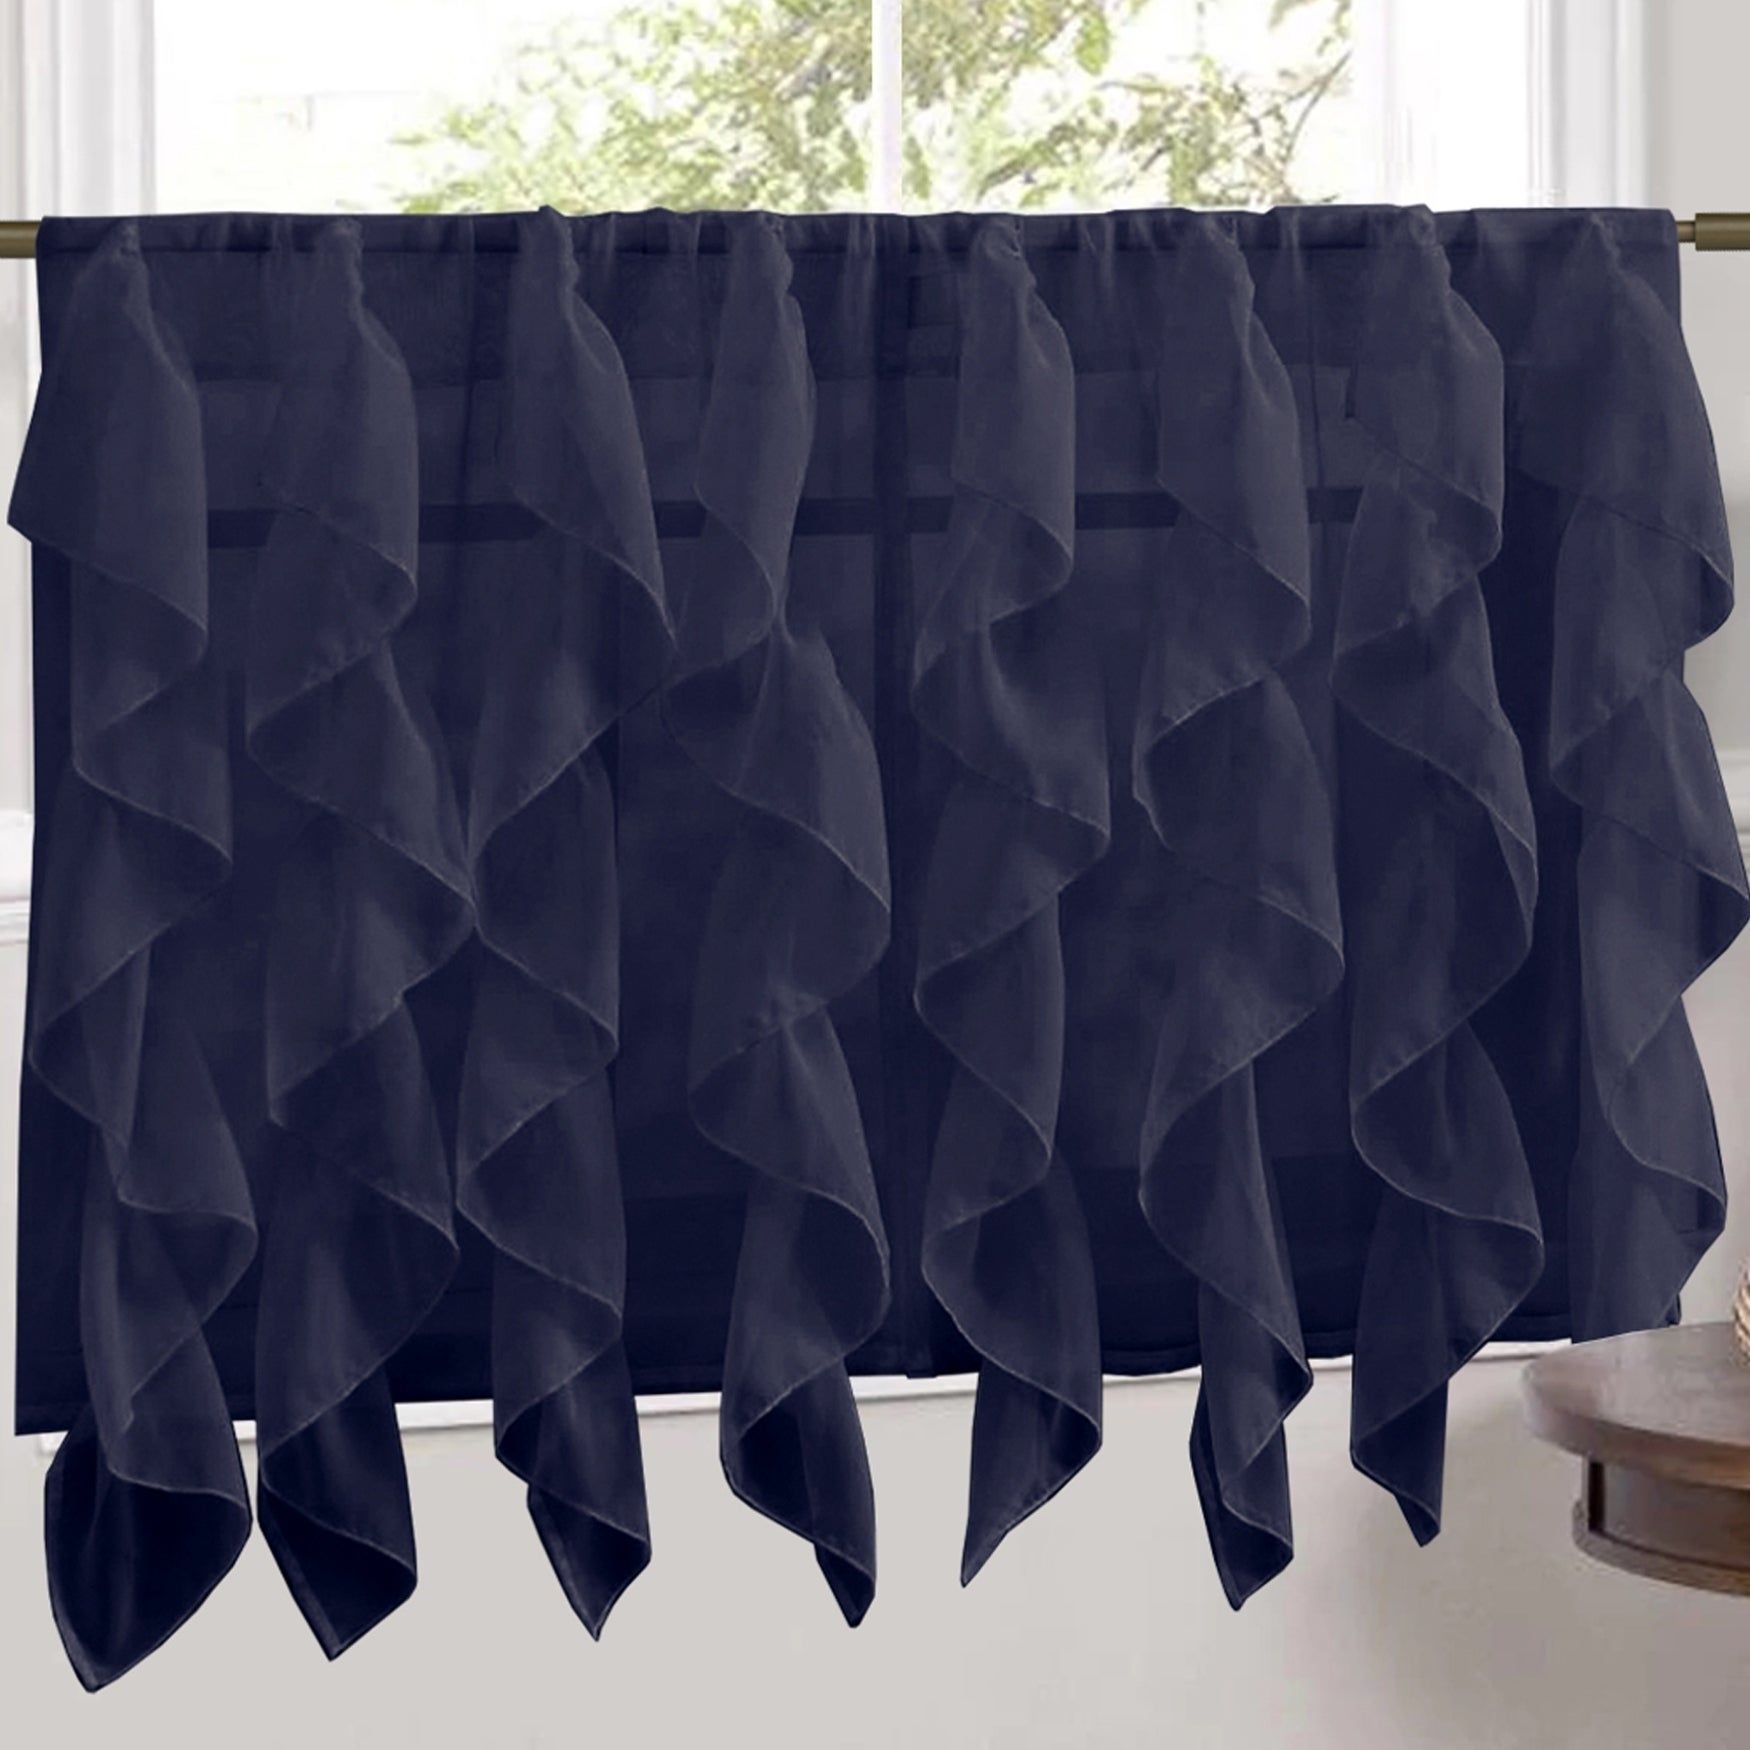 Sweet Home Collection Navy Vertical Ruffled Waterfall Valance And Curtain  Tiers Pertaining To Navy Vertical Ruffled Waterfall Valance And Curtain Tiers (View 5 of 20)